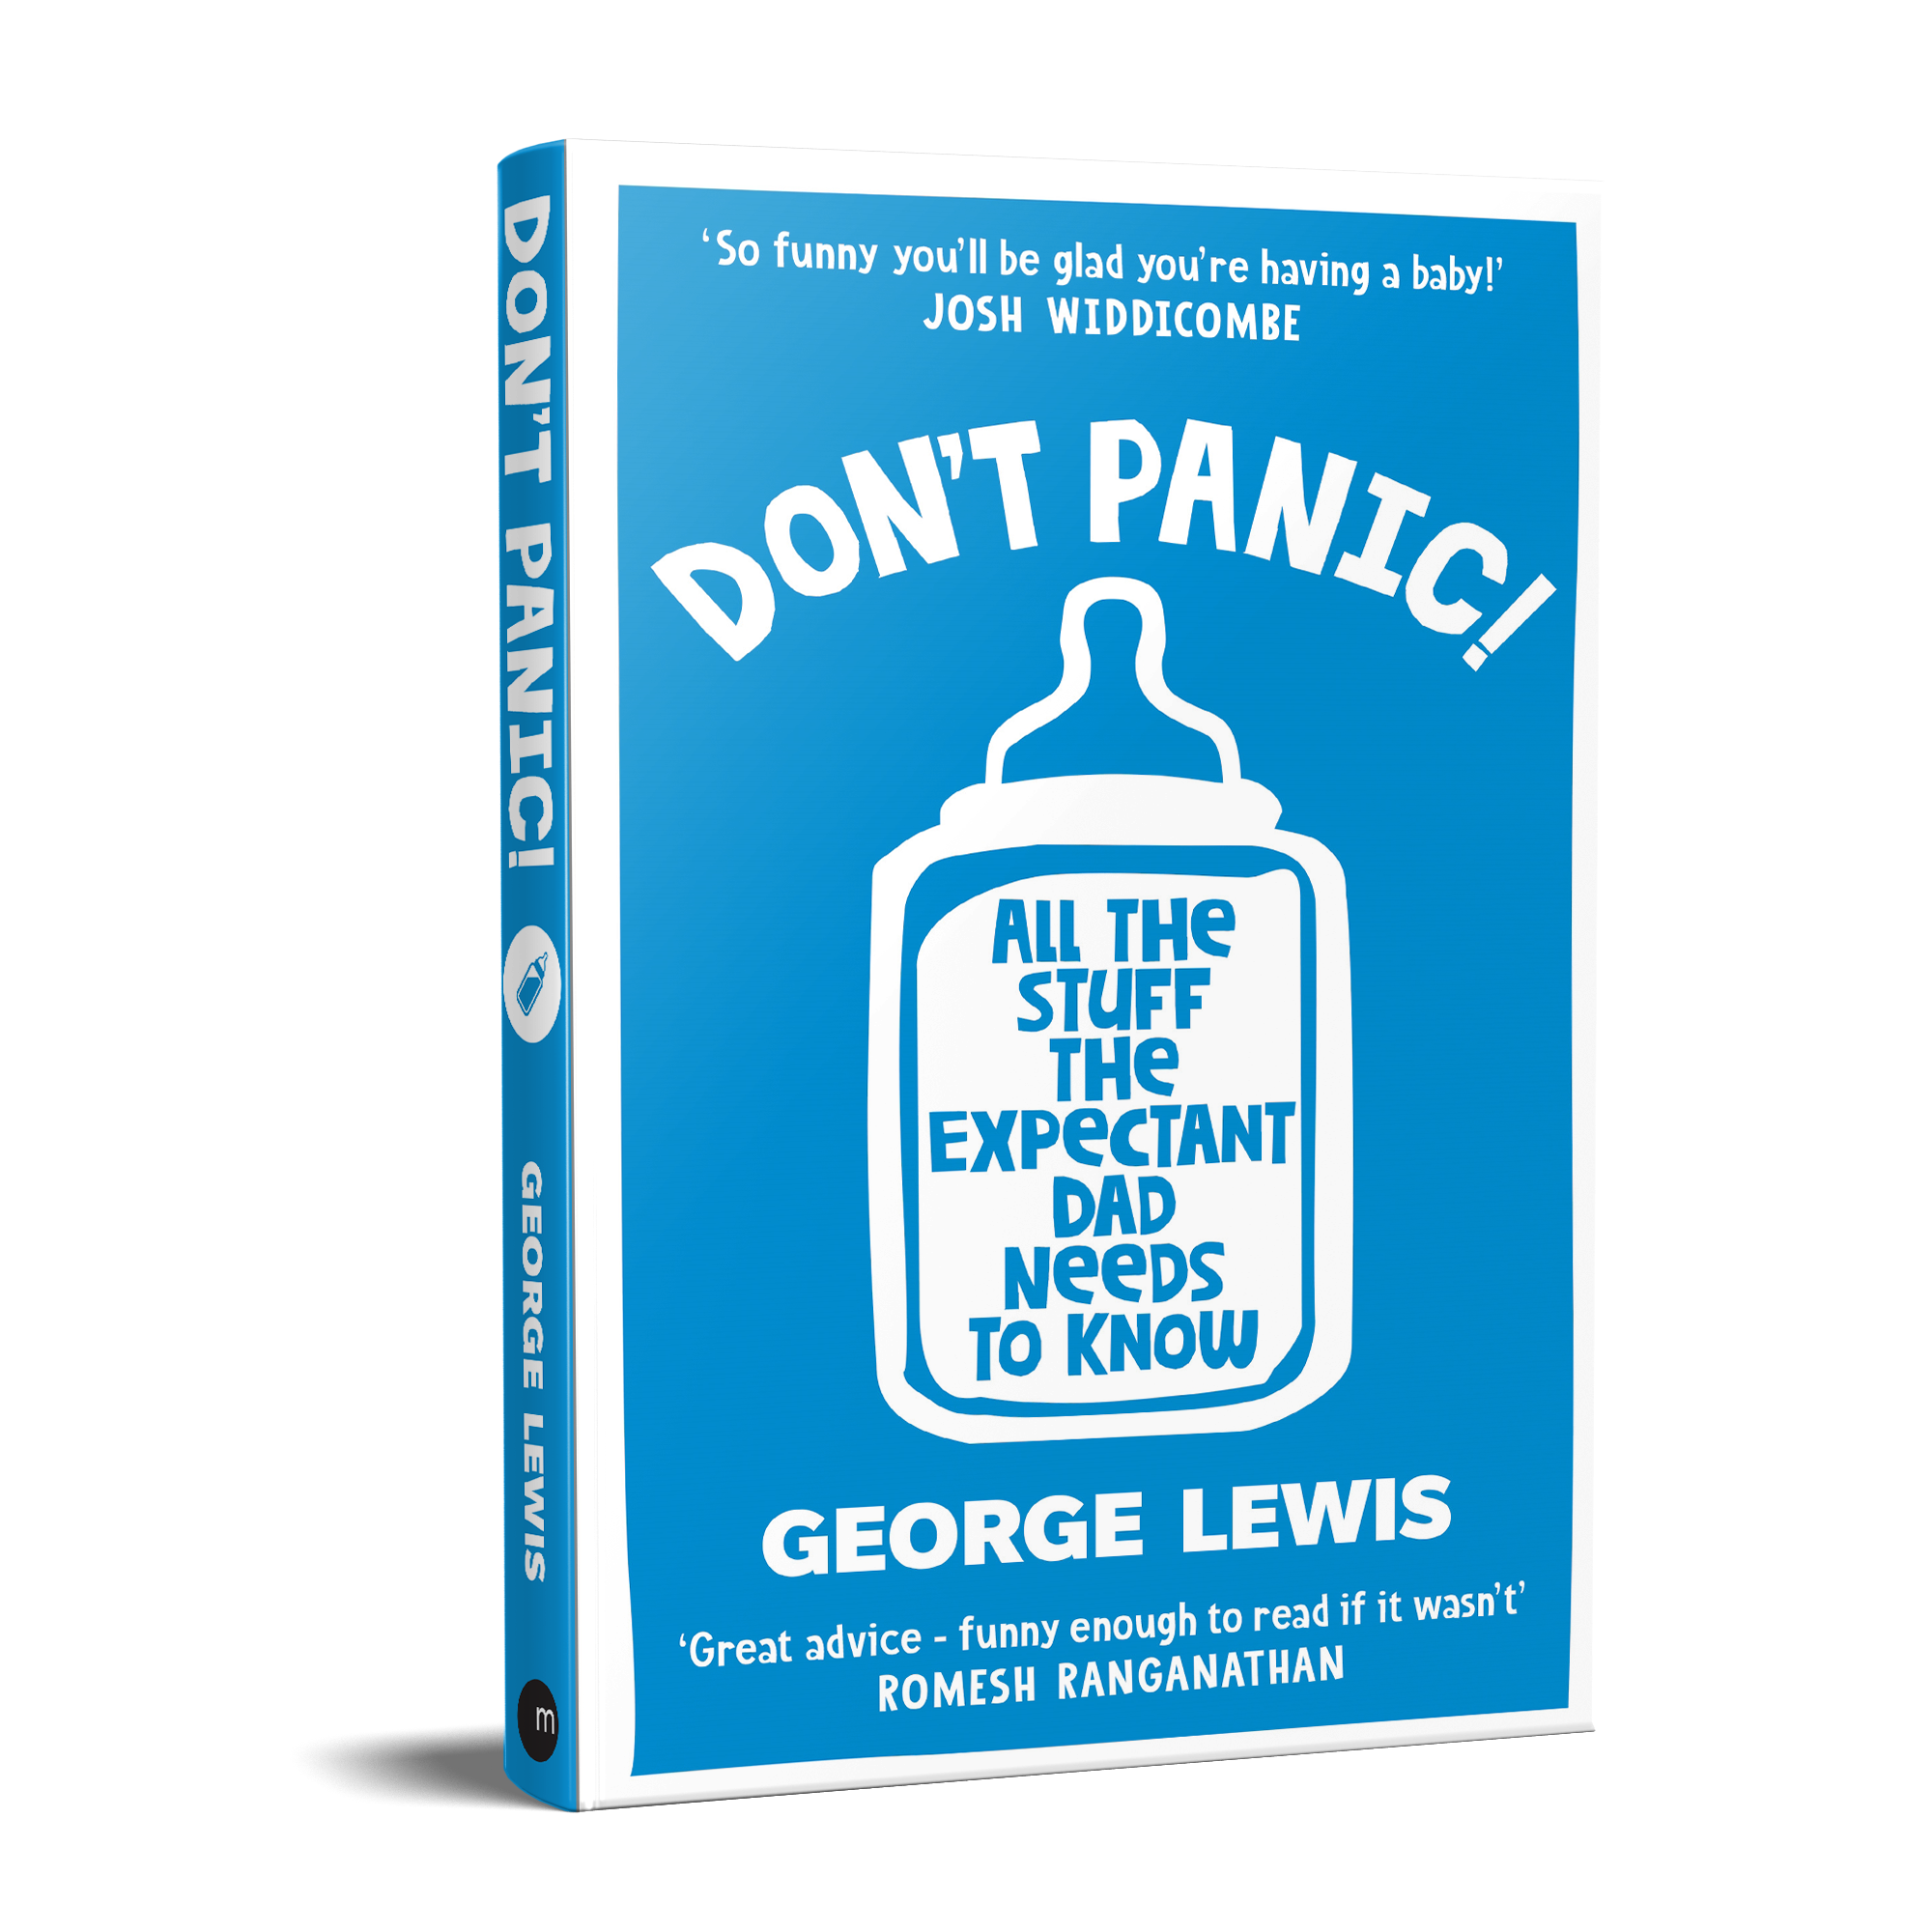 Don't Panic! by George Lewis - Essential reading for all new dads